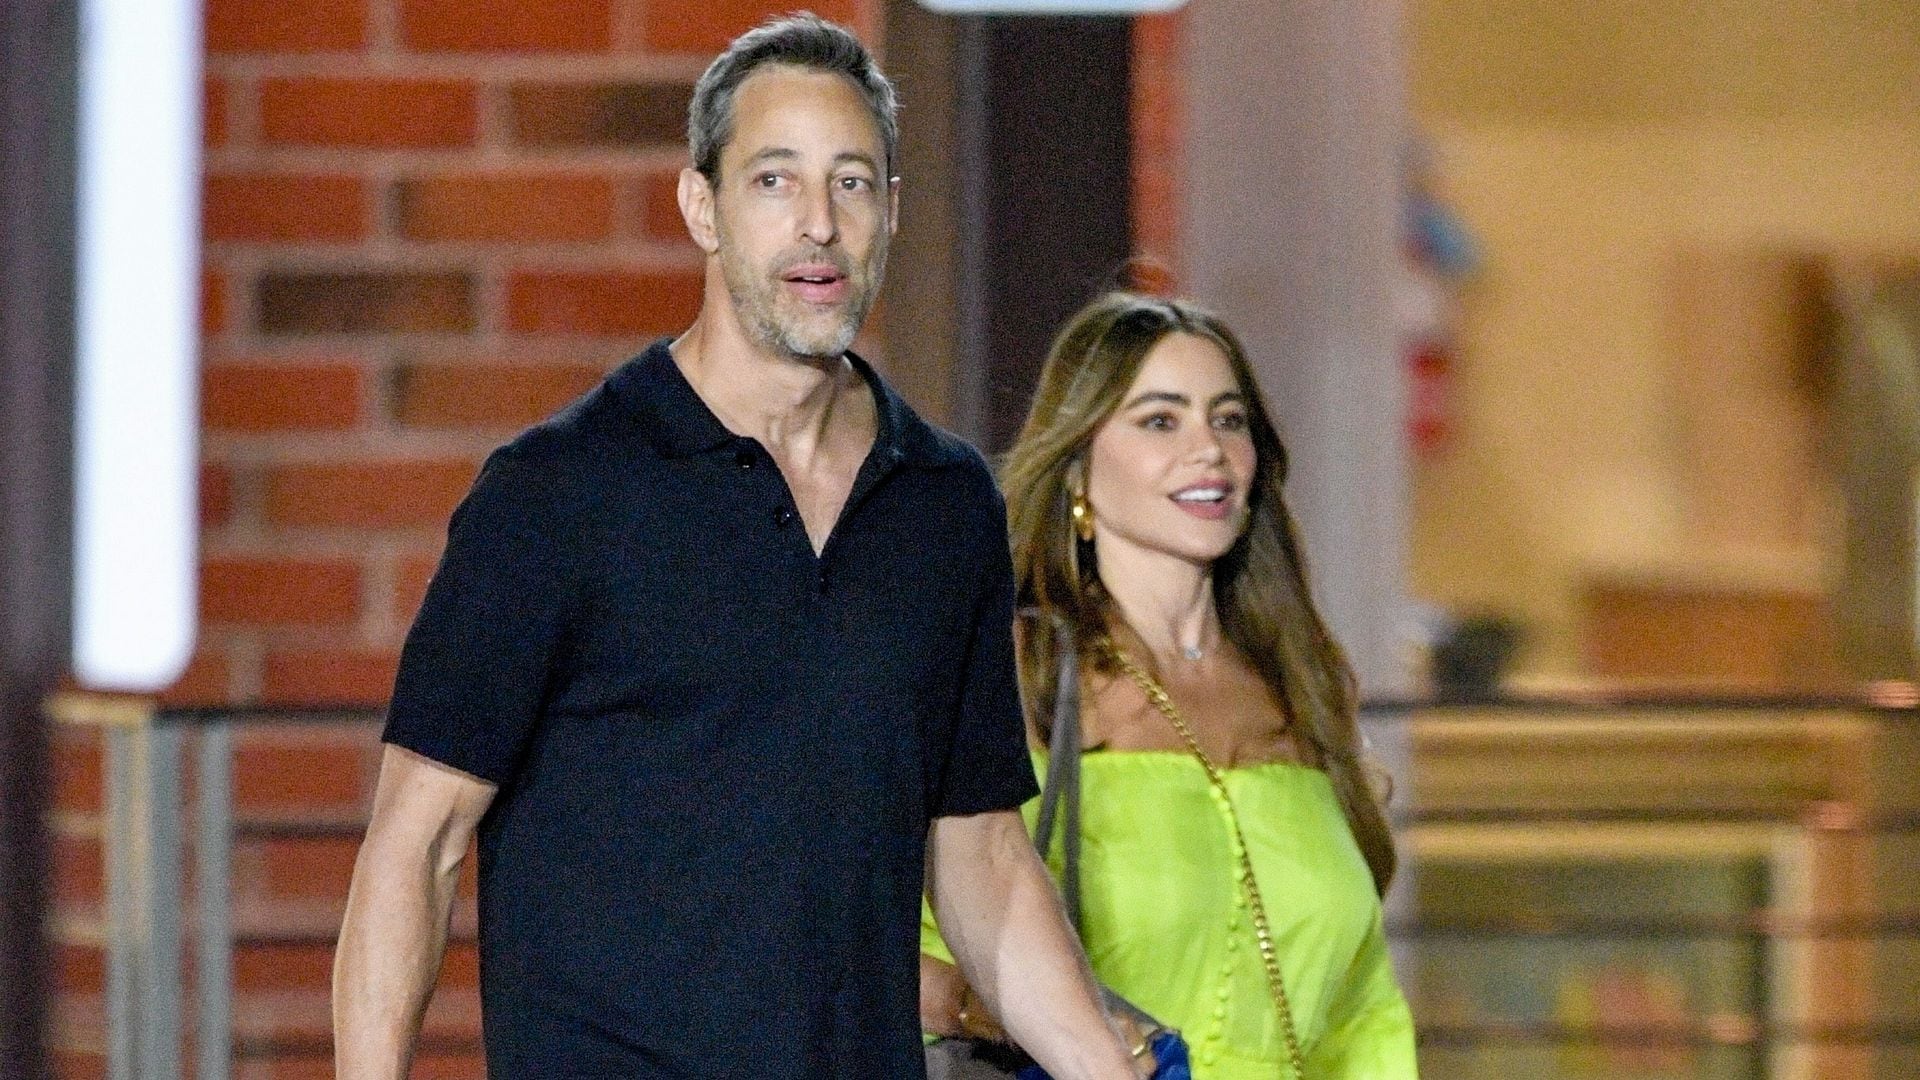 Sofia Vergara is all smiles in romantic date, one year after divorce from Joe Manganiello